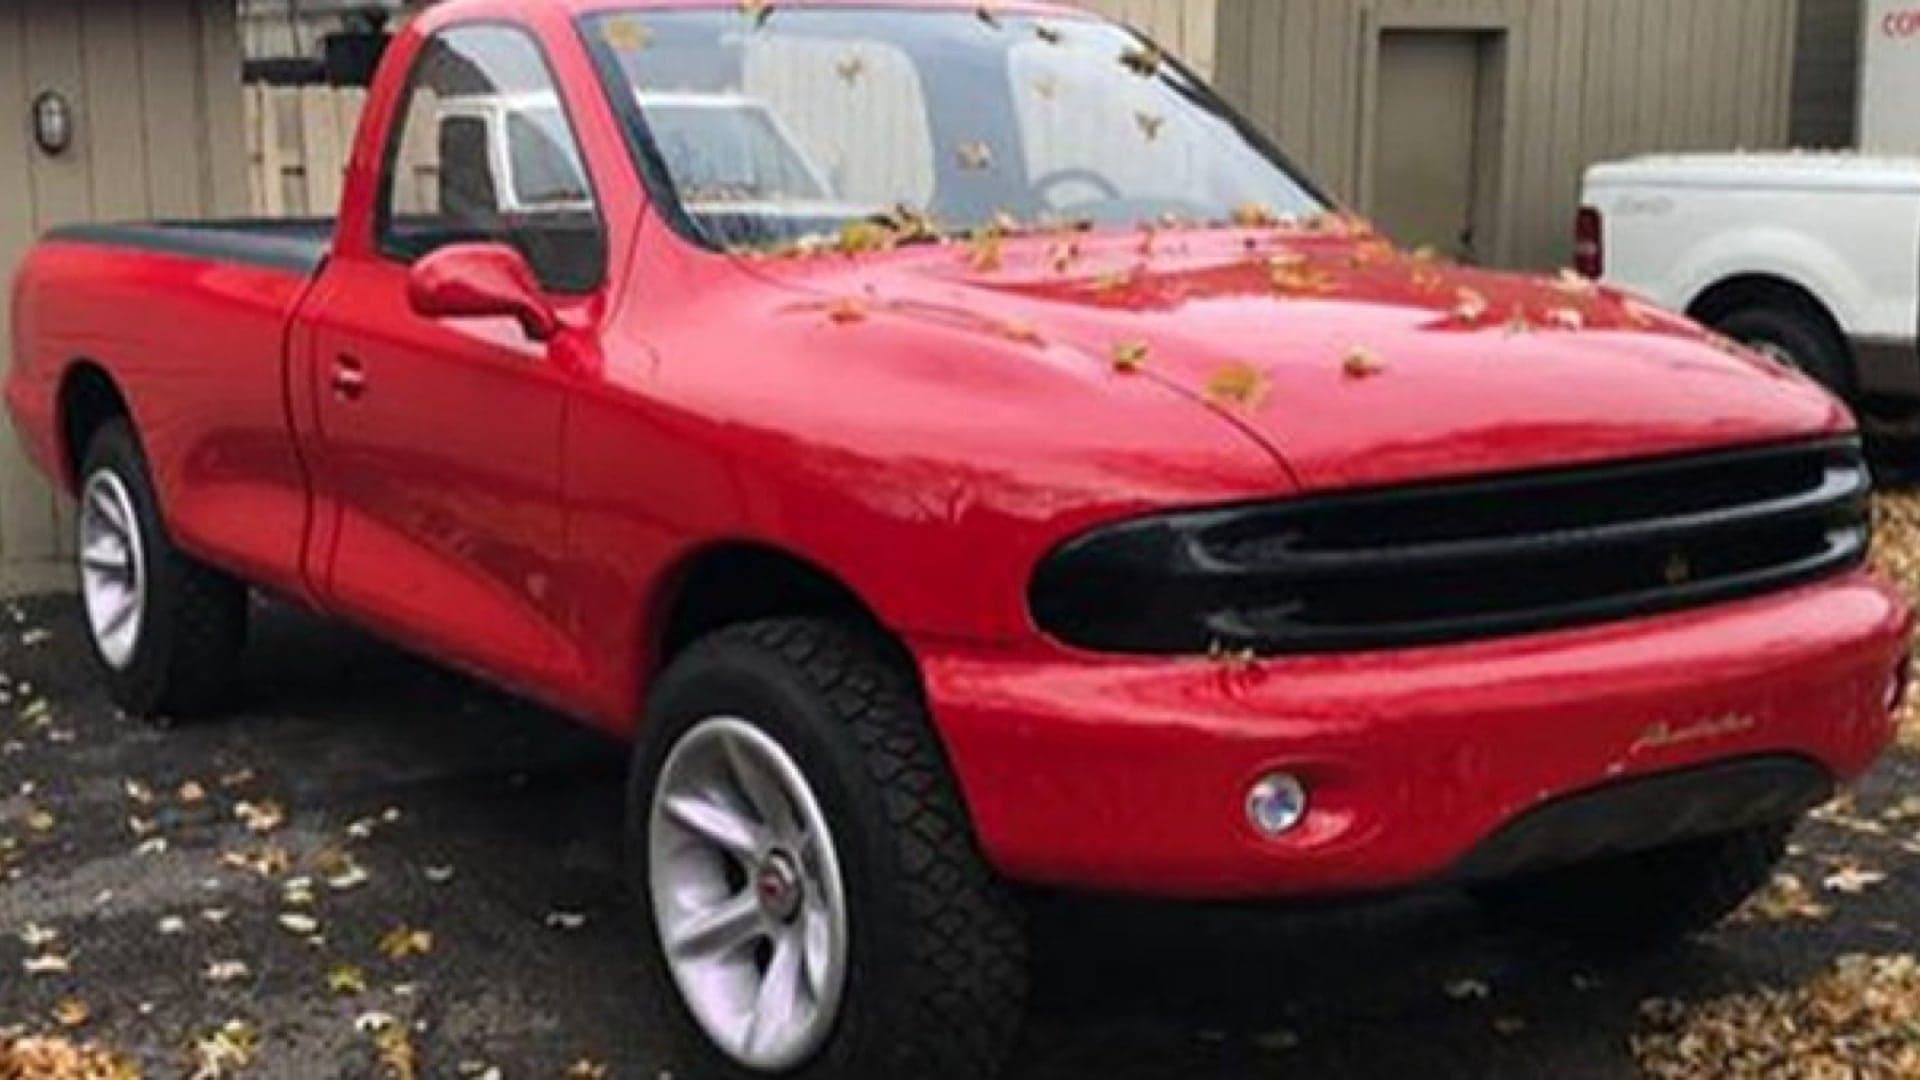 This Goofy-Lookin’ ’90s Ford Concept Truck Is For Sale In Detroit